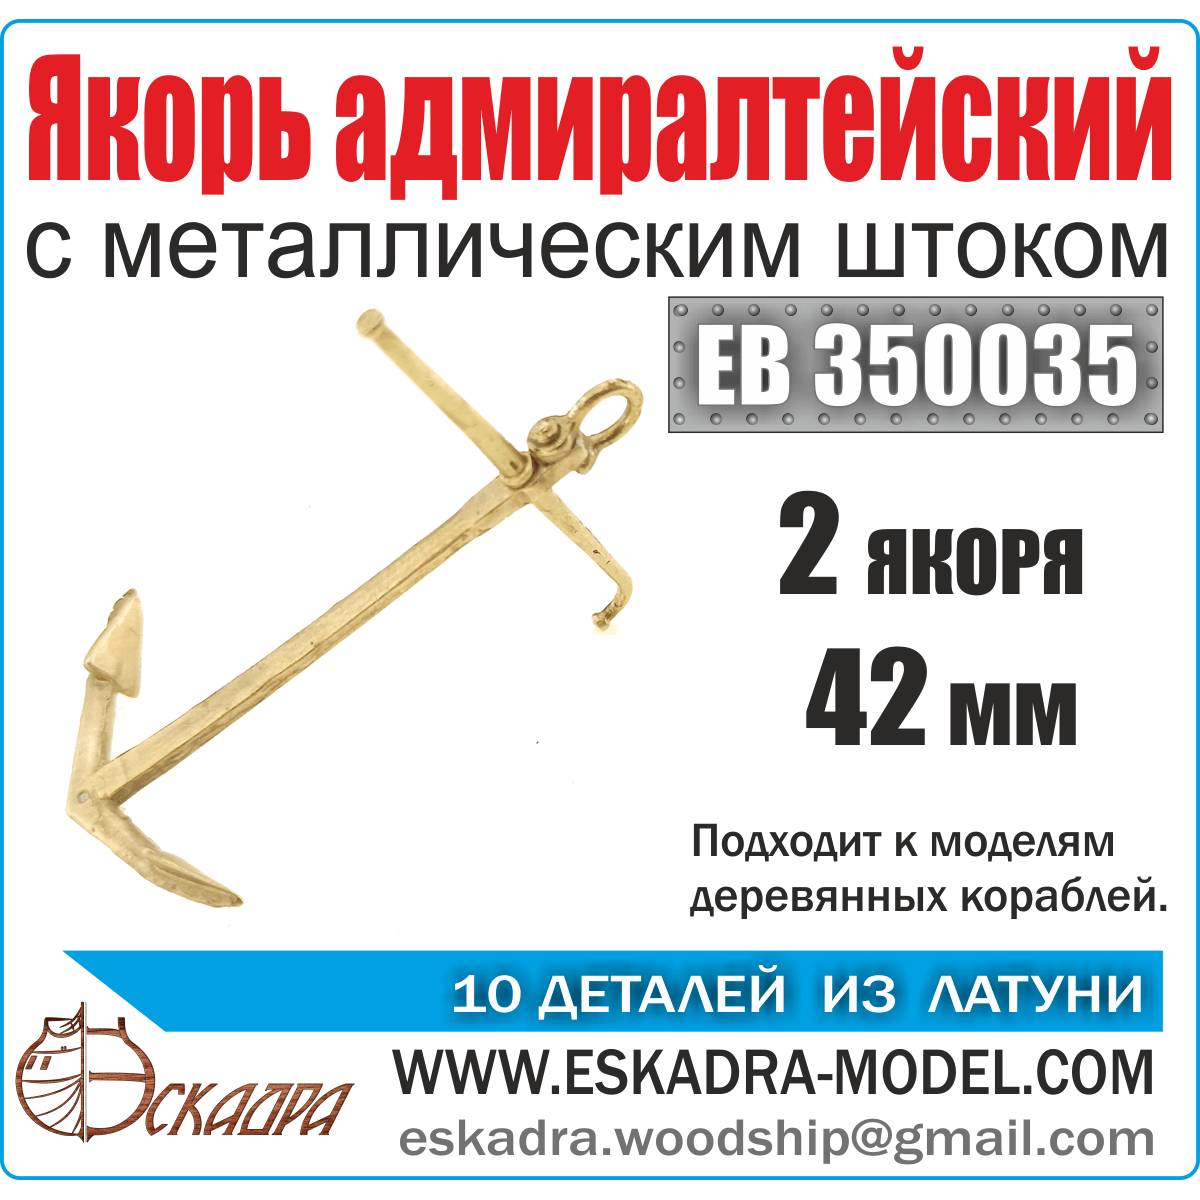 Admiralteysky anchor 42 mm with a metal rod - imodeller.store